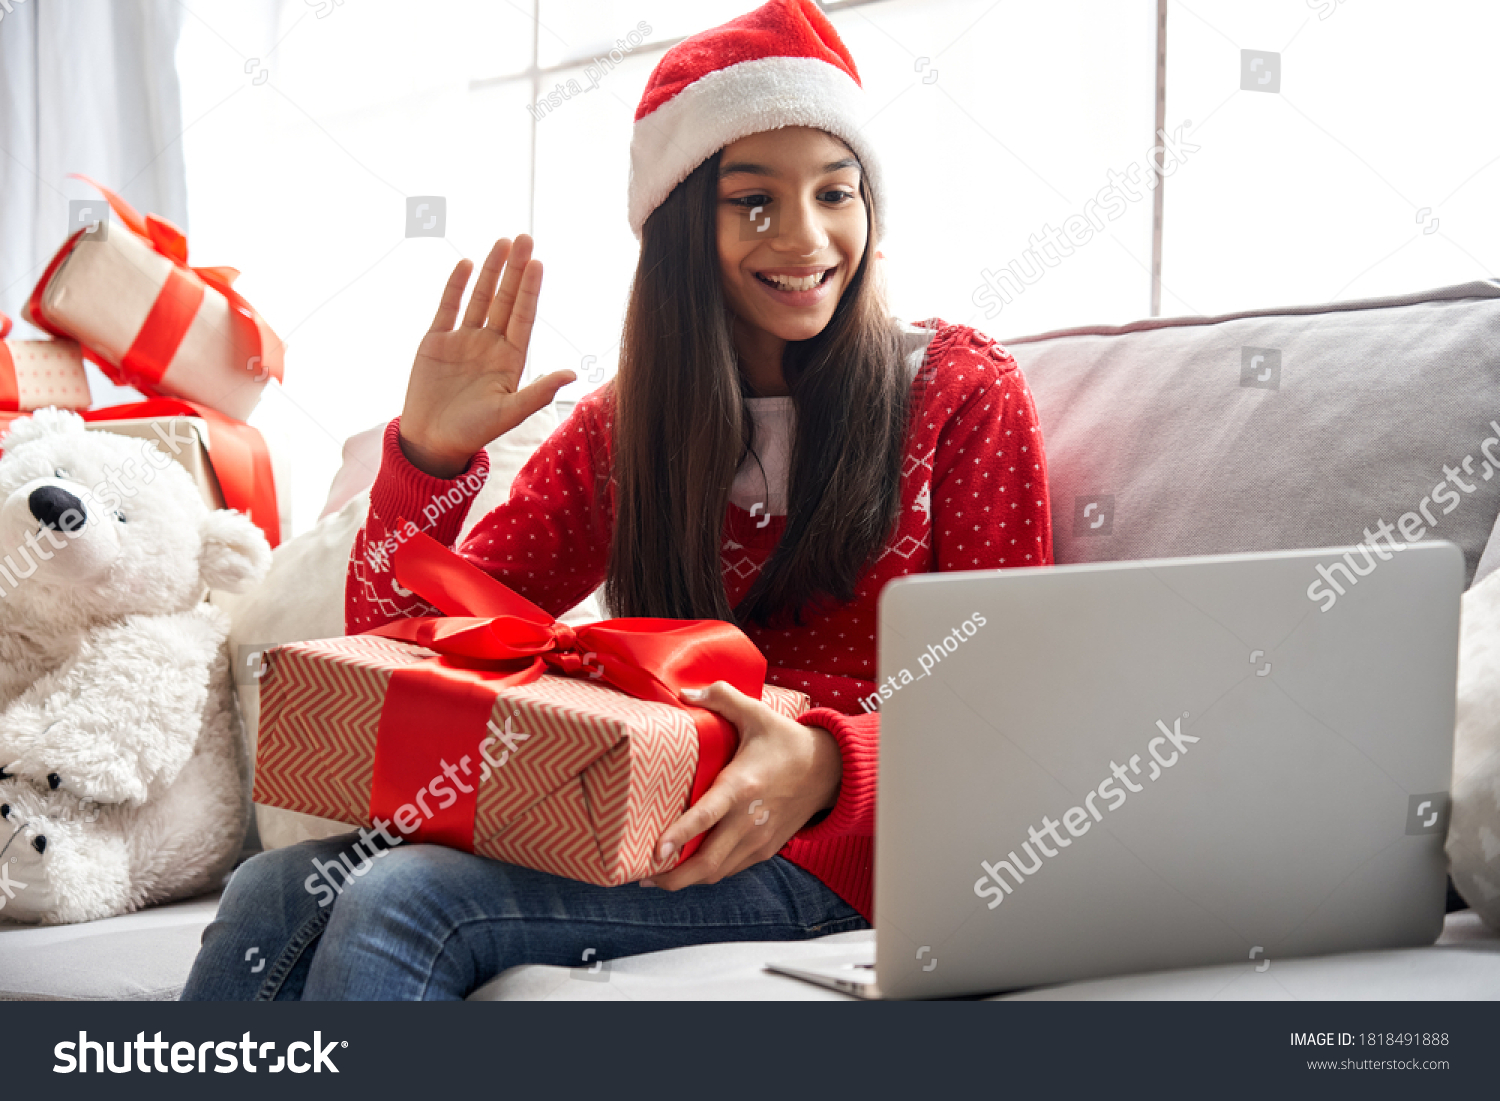 Smiling indian latin child kid girl wearing santa hat holding Christmas gift box, New Year present waving hand video calling family by webcam virtual meeting chat on holiday sitting on couch at home. #1818491888